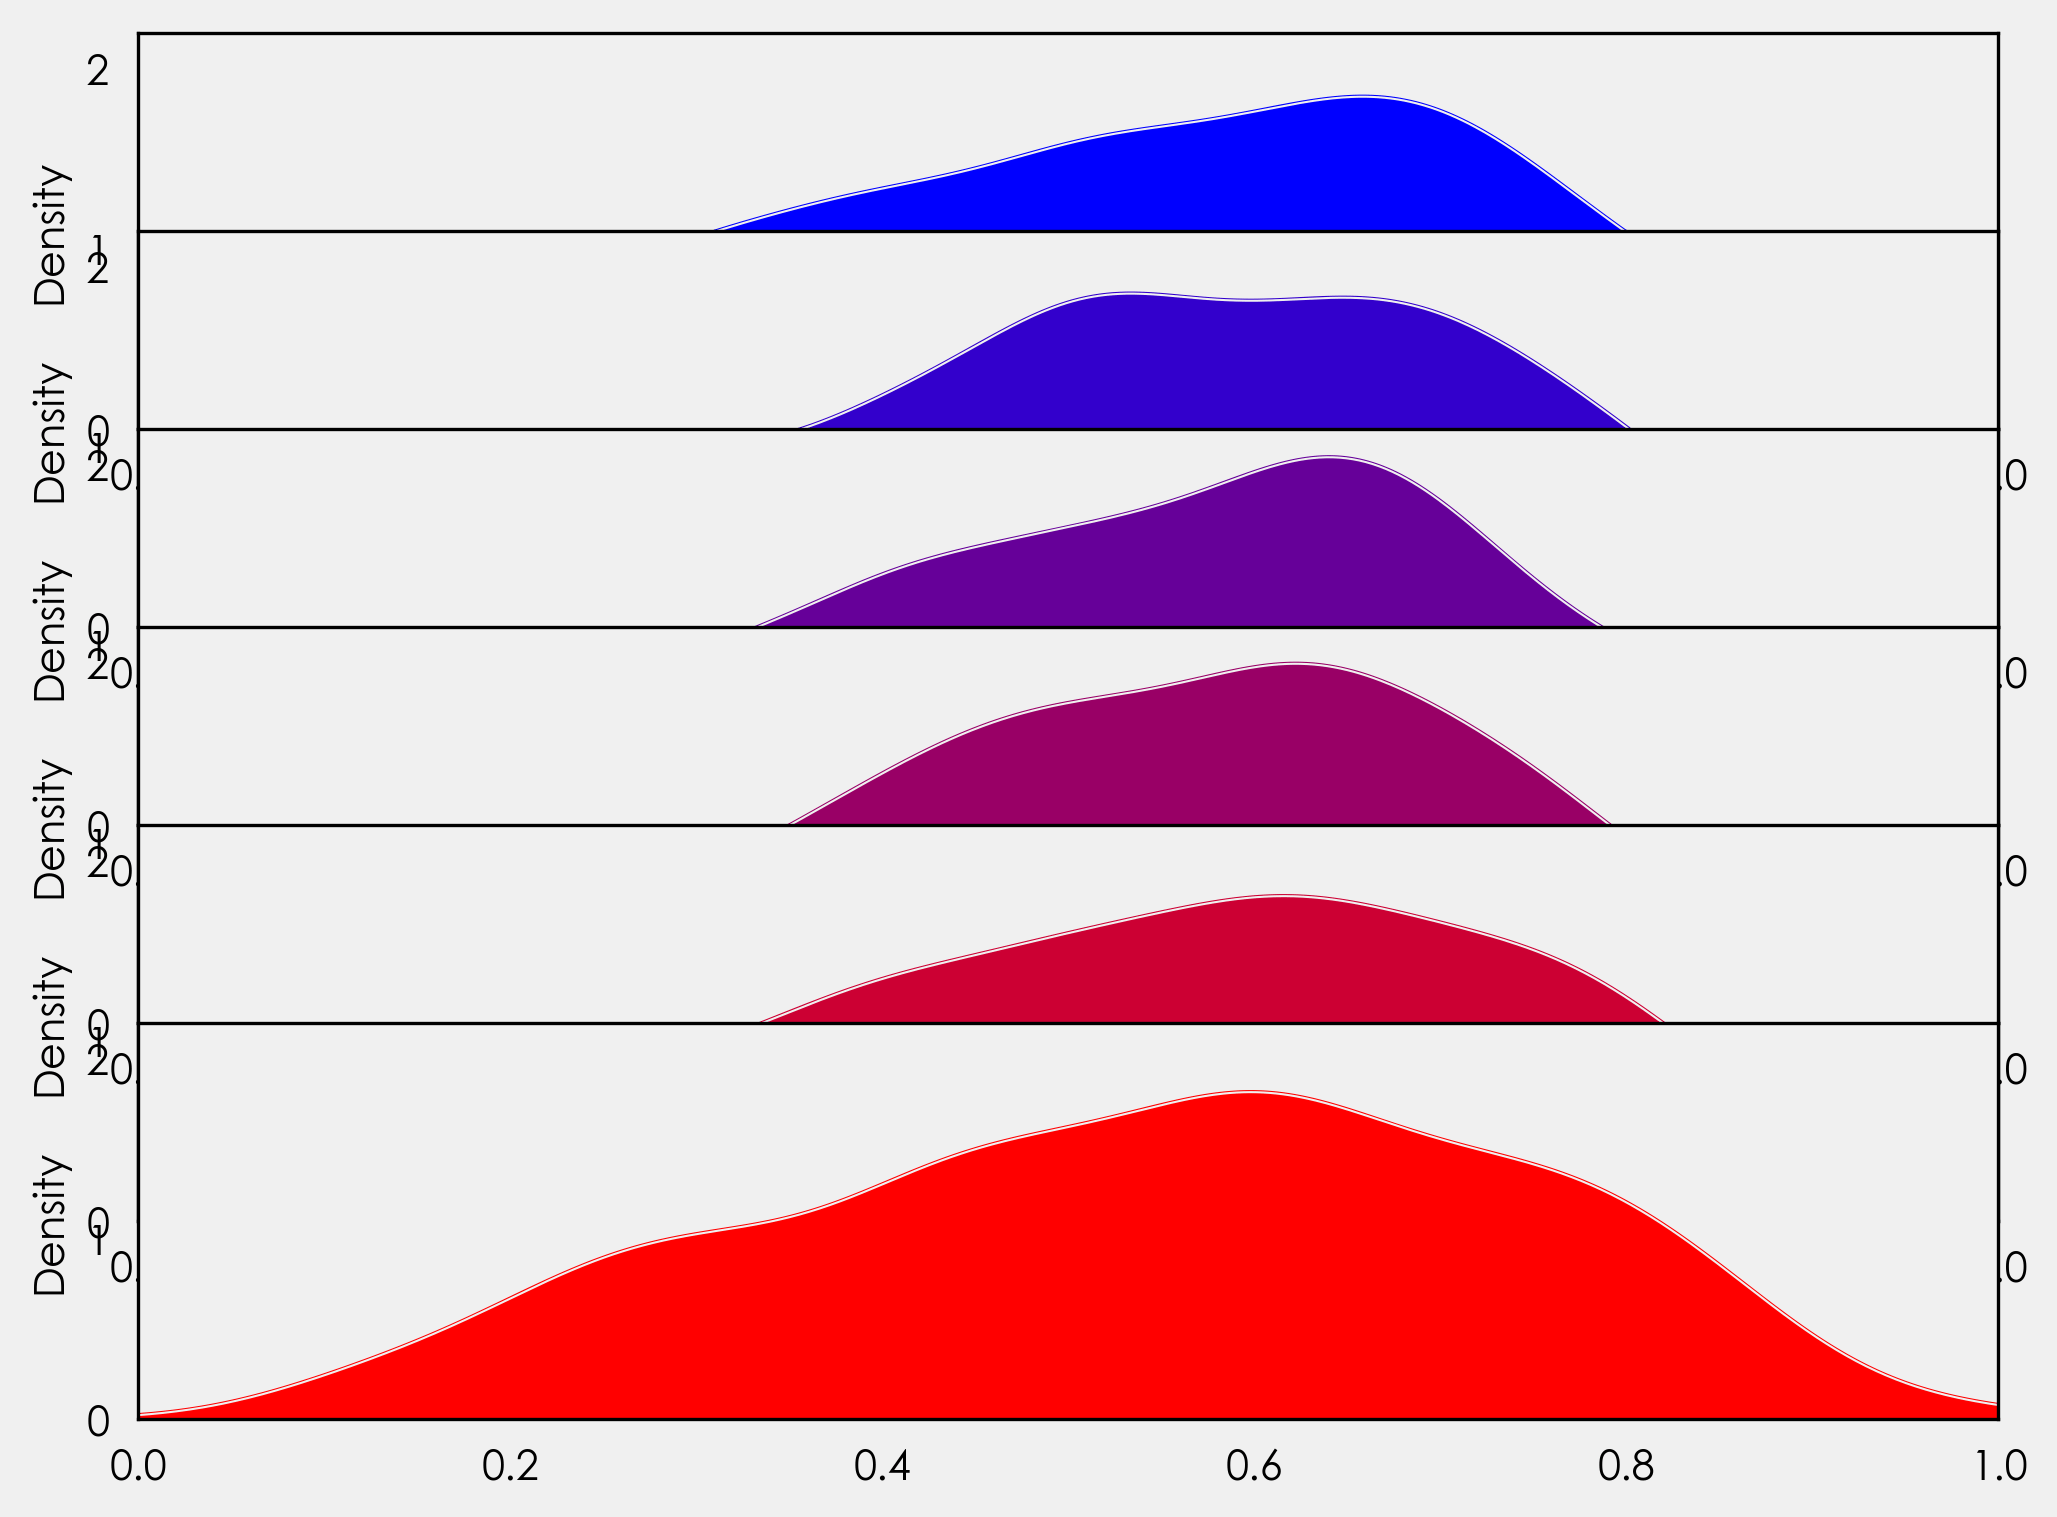 6 kernel density estimate (KDE) charts, each with different shades ranging from blue to blood red. However, the y axis object are overlapping.